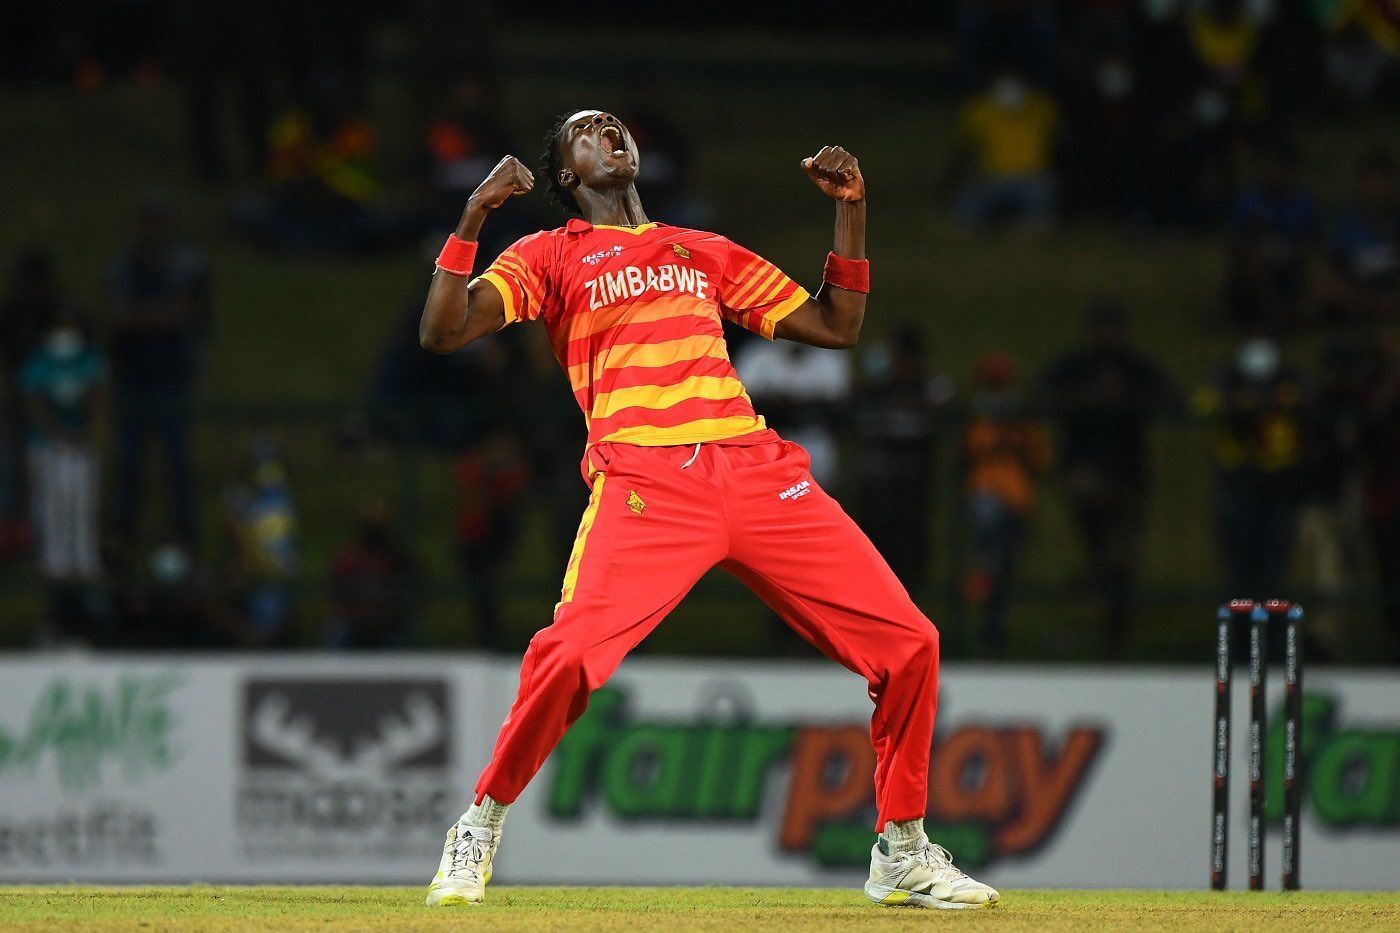 Blessing Muzarabani is a wicket-taking bowler who deserves an IPL contract having proved himself at the highest level